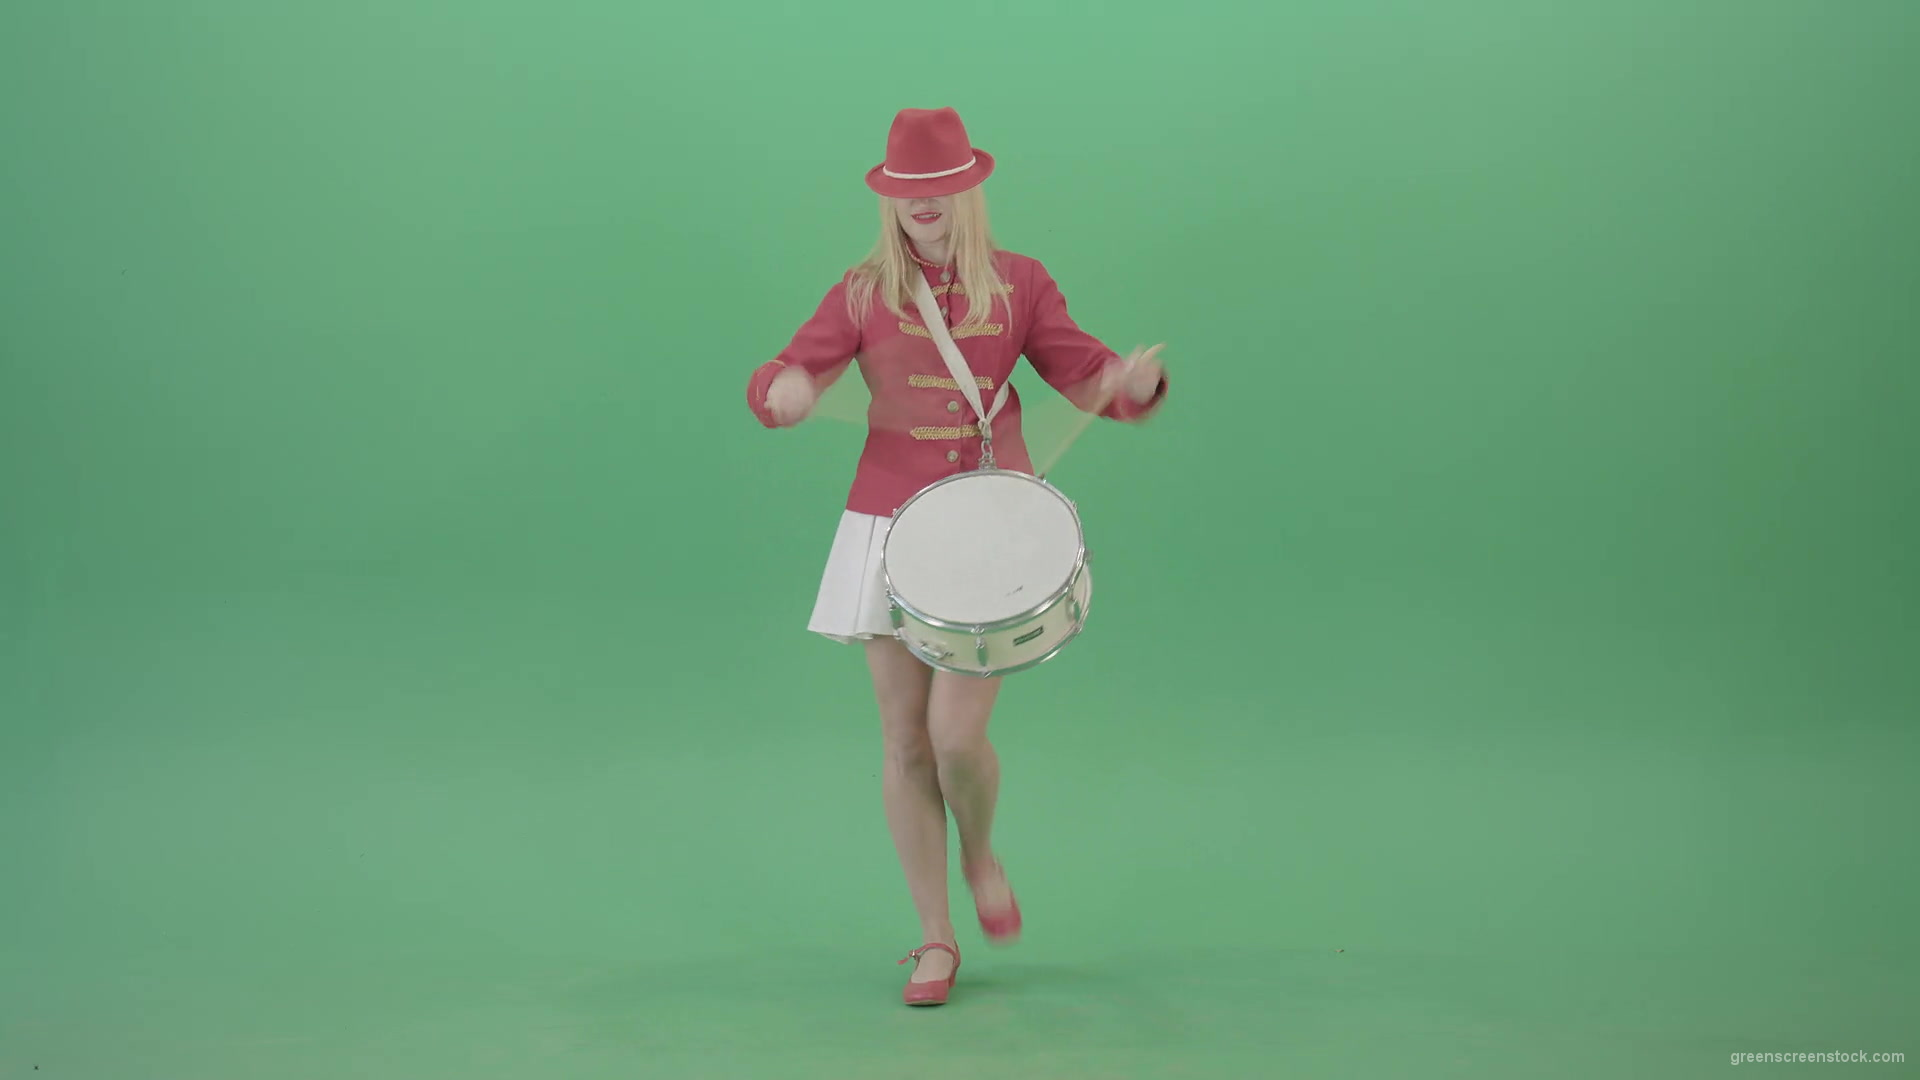 Blonde-Girl-playing-snare-drum-fast-and-marching-on-green-screen-4K-Video-Footage-1920_002 Green Screen Stock